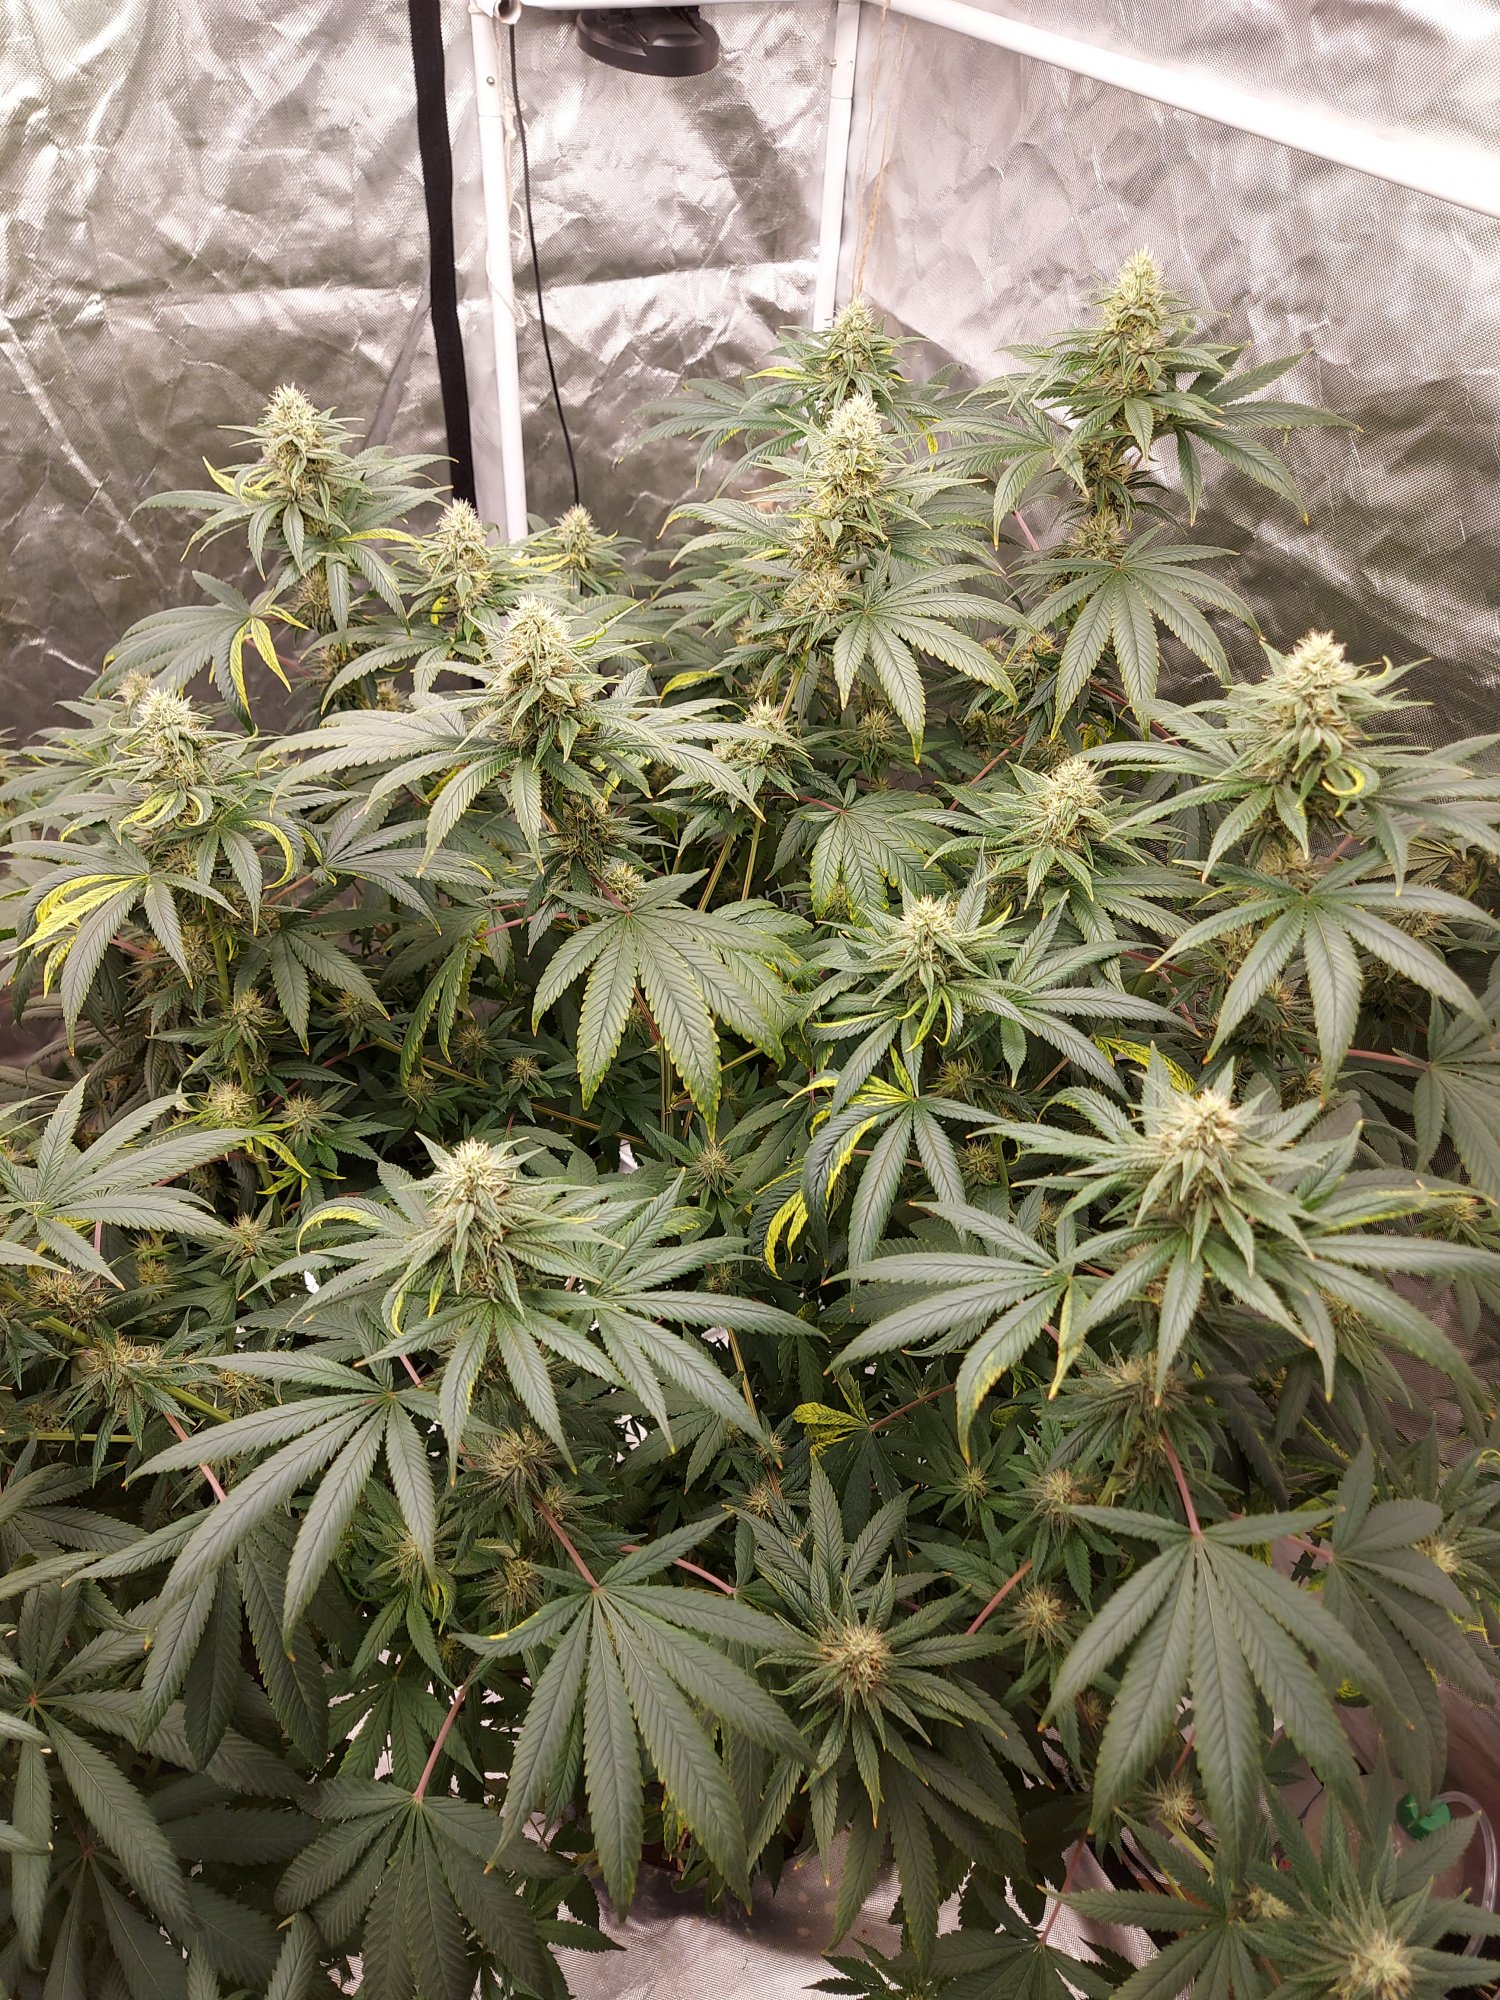 Another week or so away from harvest 6